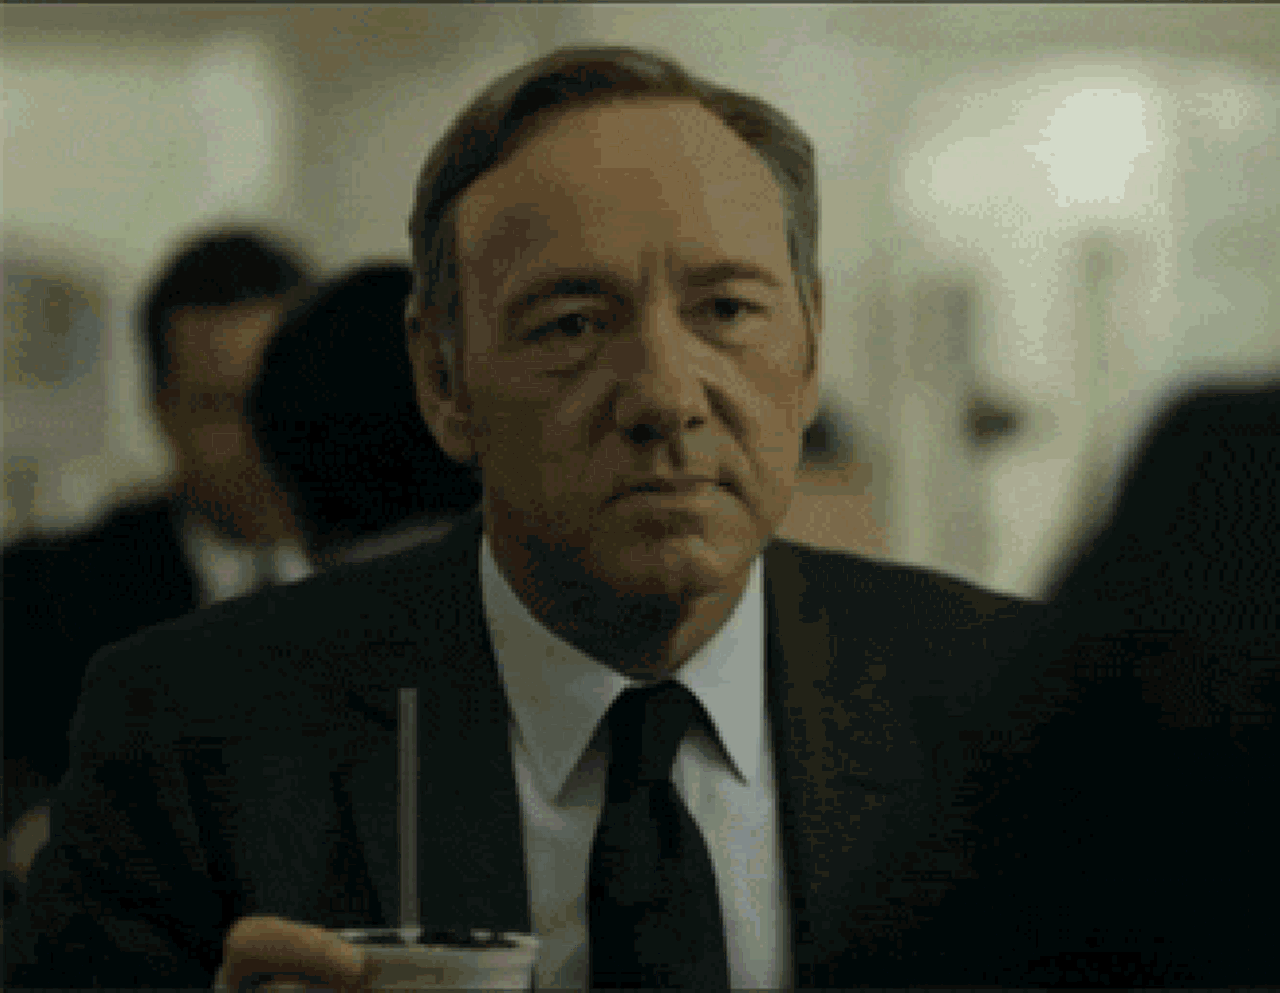 Frank Underwood, played by Kevin Spacey, gives one of the best disapproval faces in the business. 
via